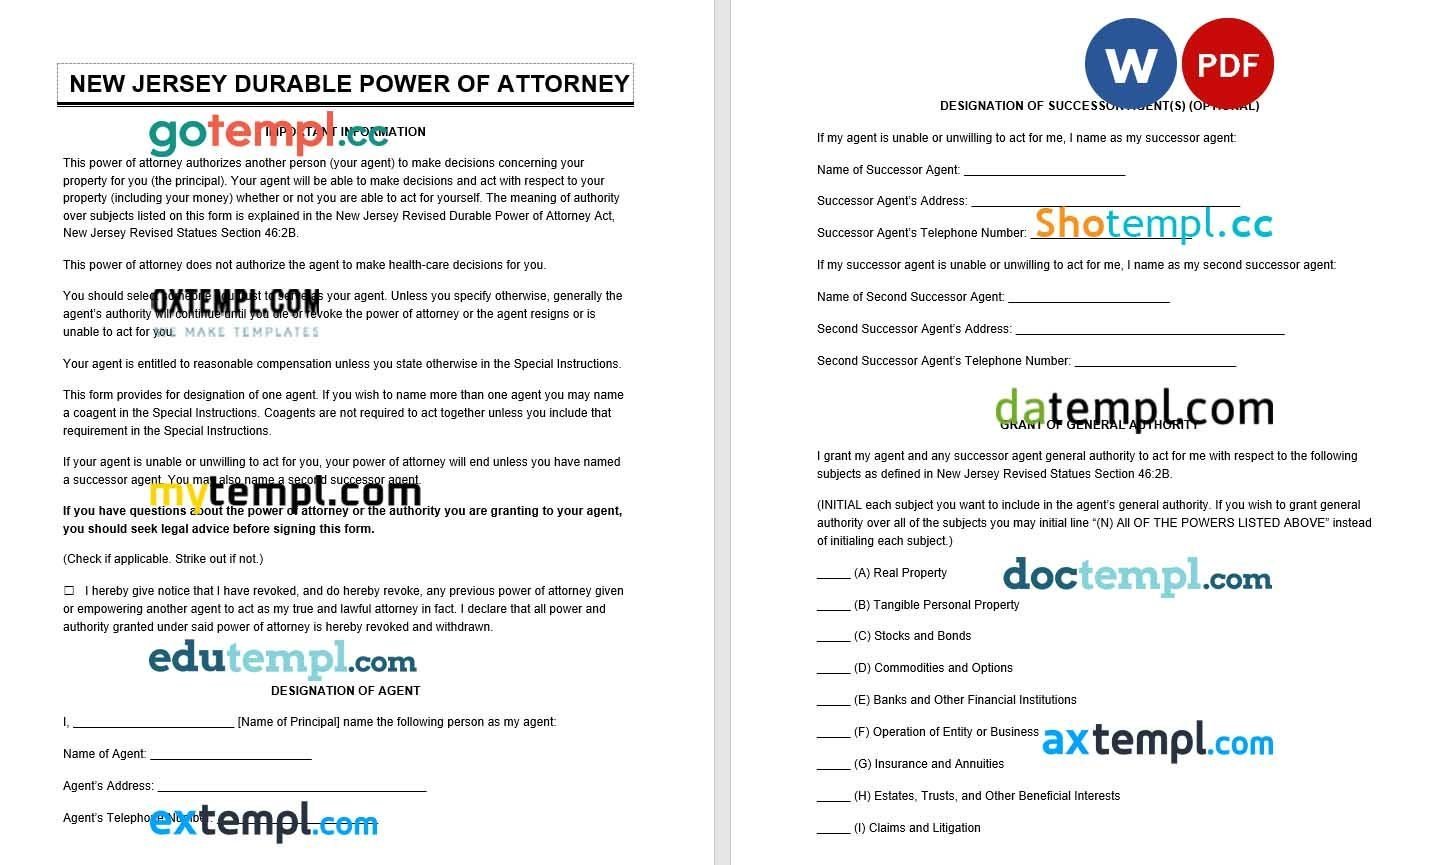 New Jersey Durable Power of Attorney example, fully editable